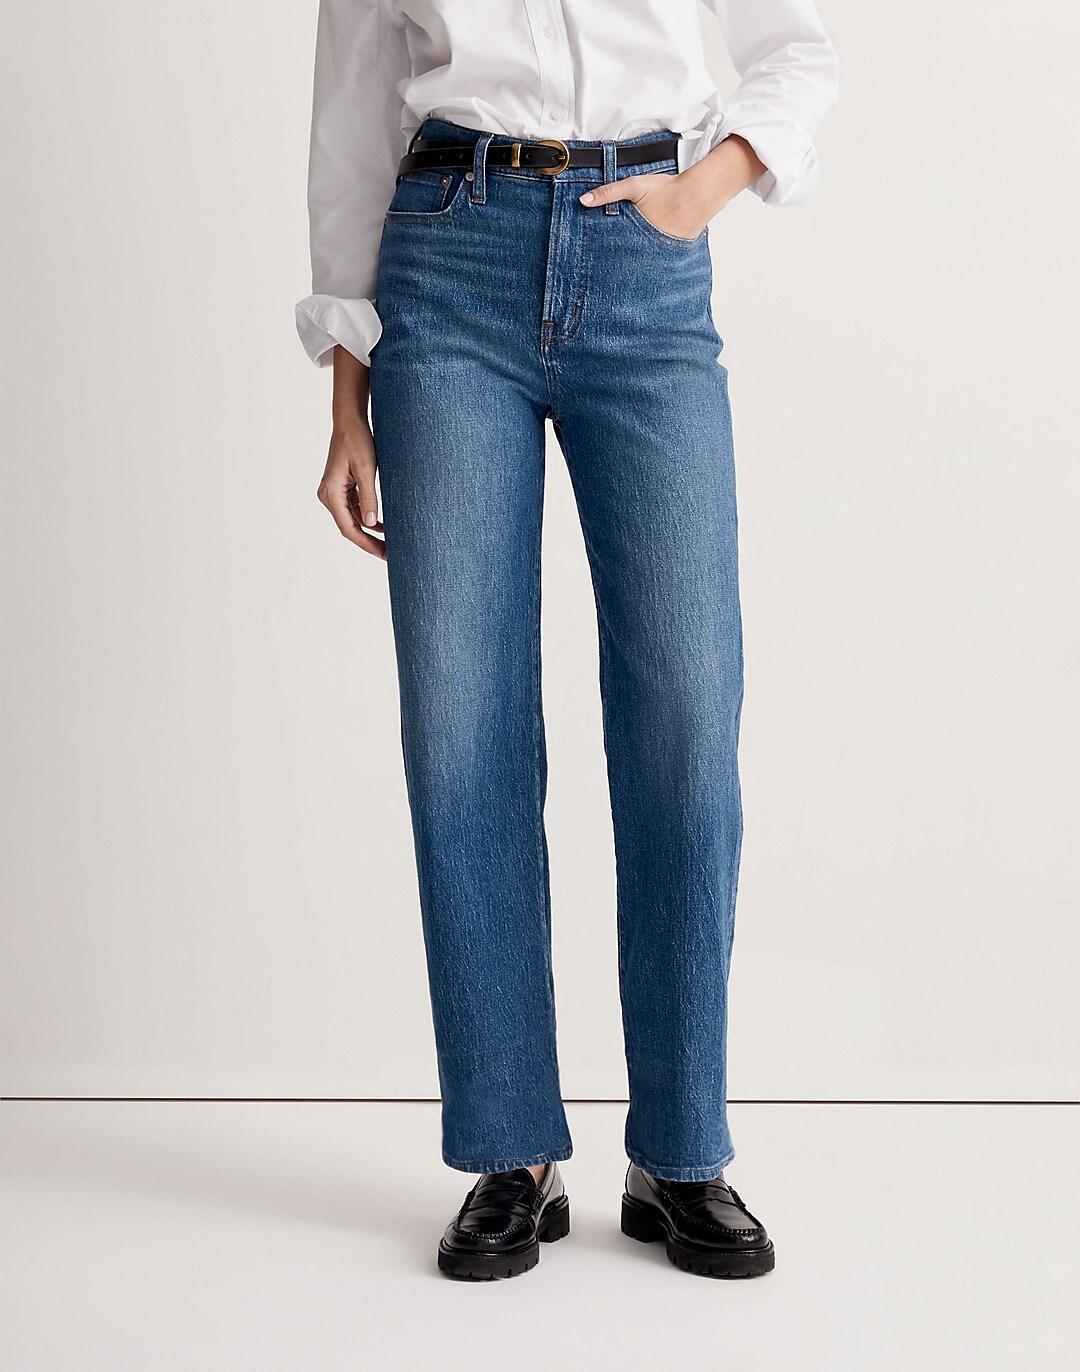 Madewell - Denim That Keeps On Giving - fiftytwothursdays